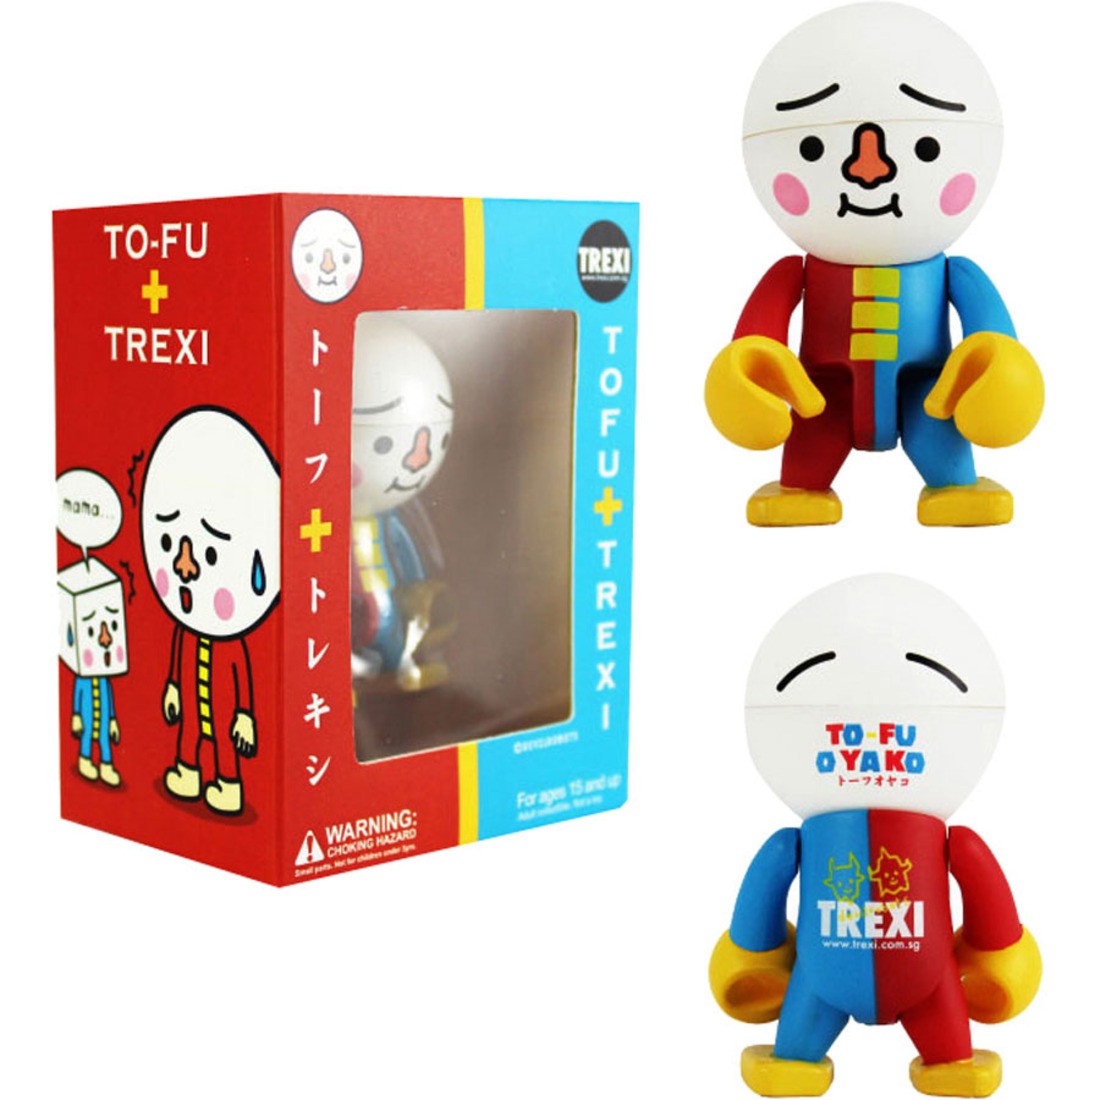 To-Fu Oyako 2.5 Inch Trexi Figure (red / blue)